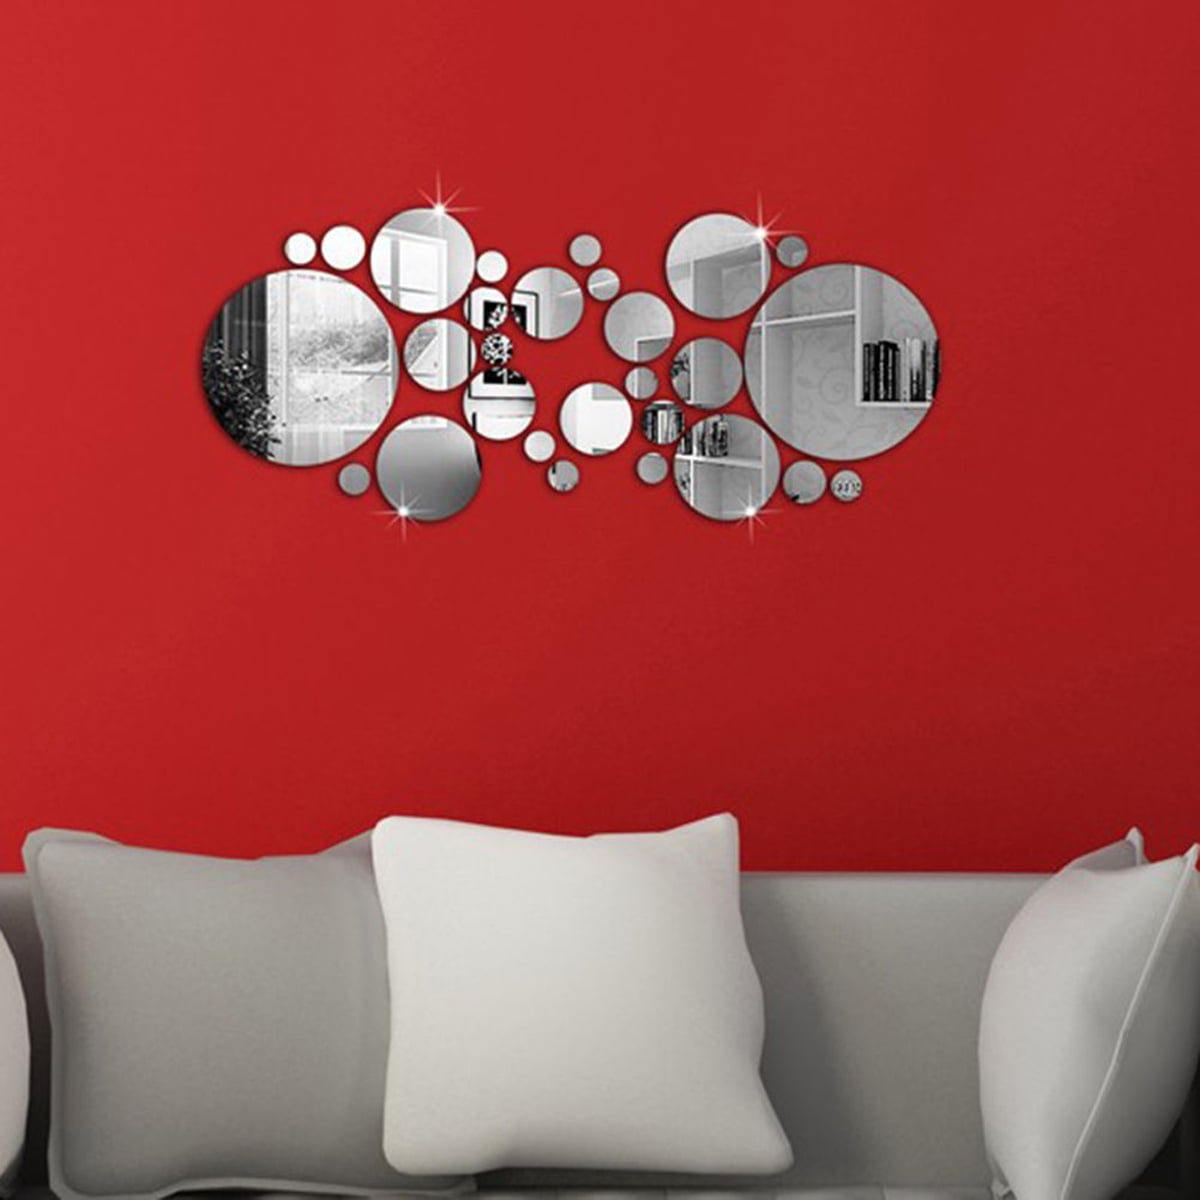 3D Mirror Wall Sticker Removable Decal Acrylic Art Mural Room Home Decor Gift US